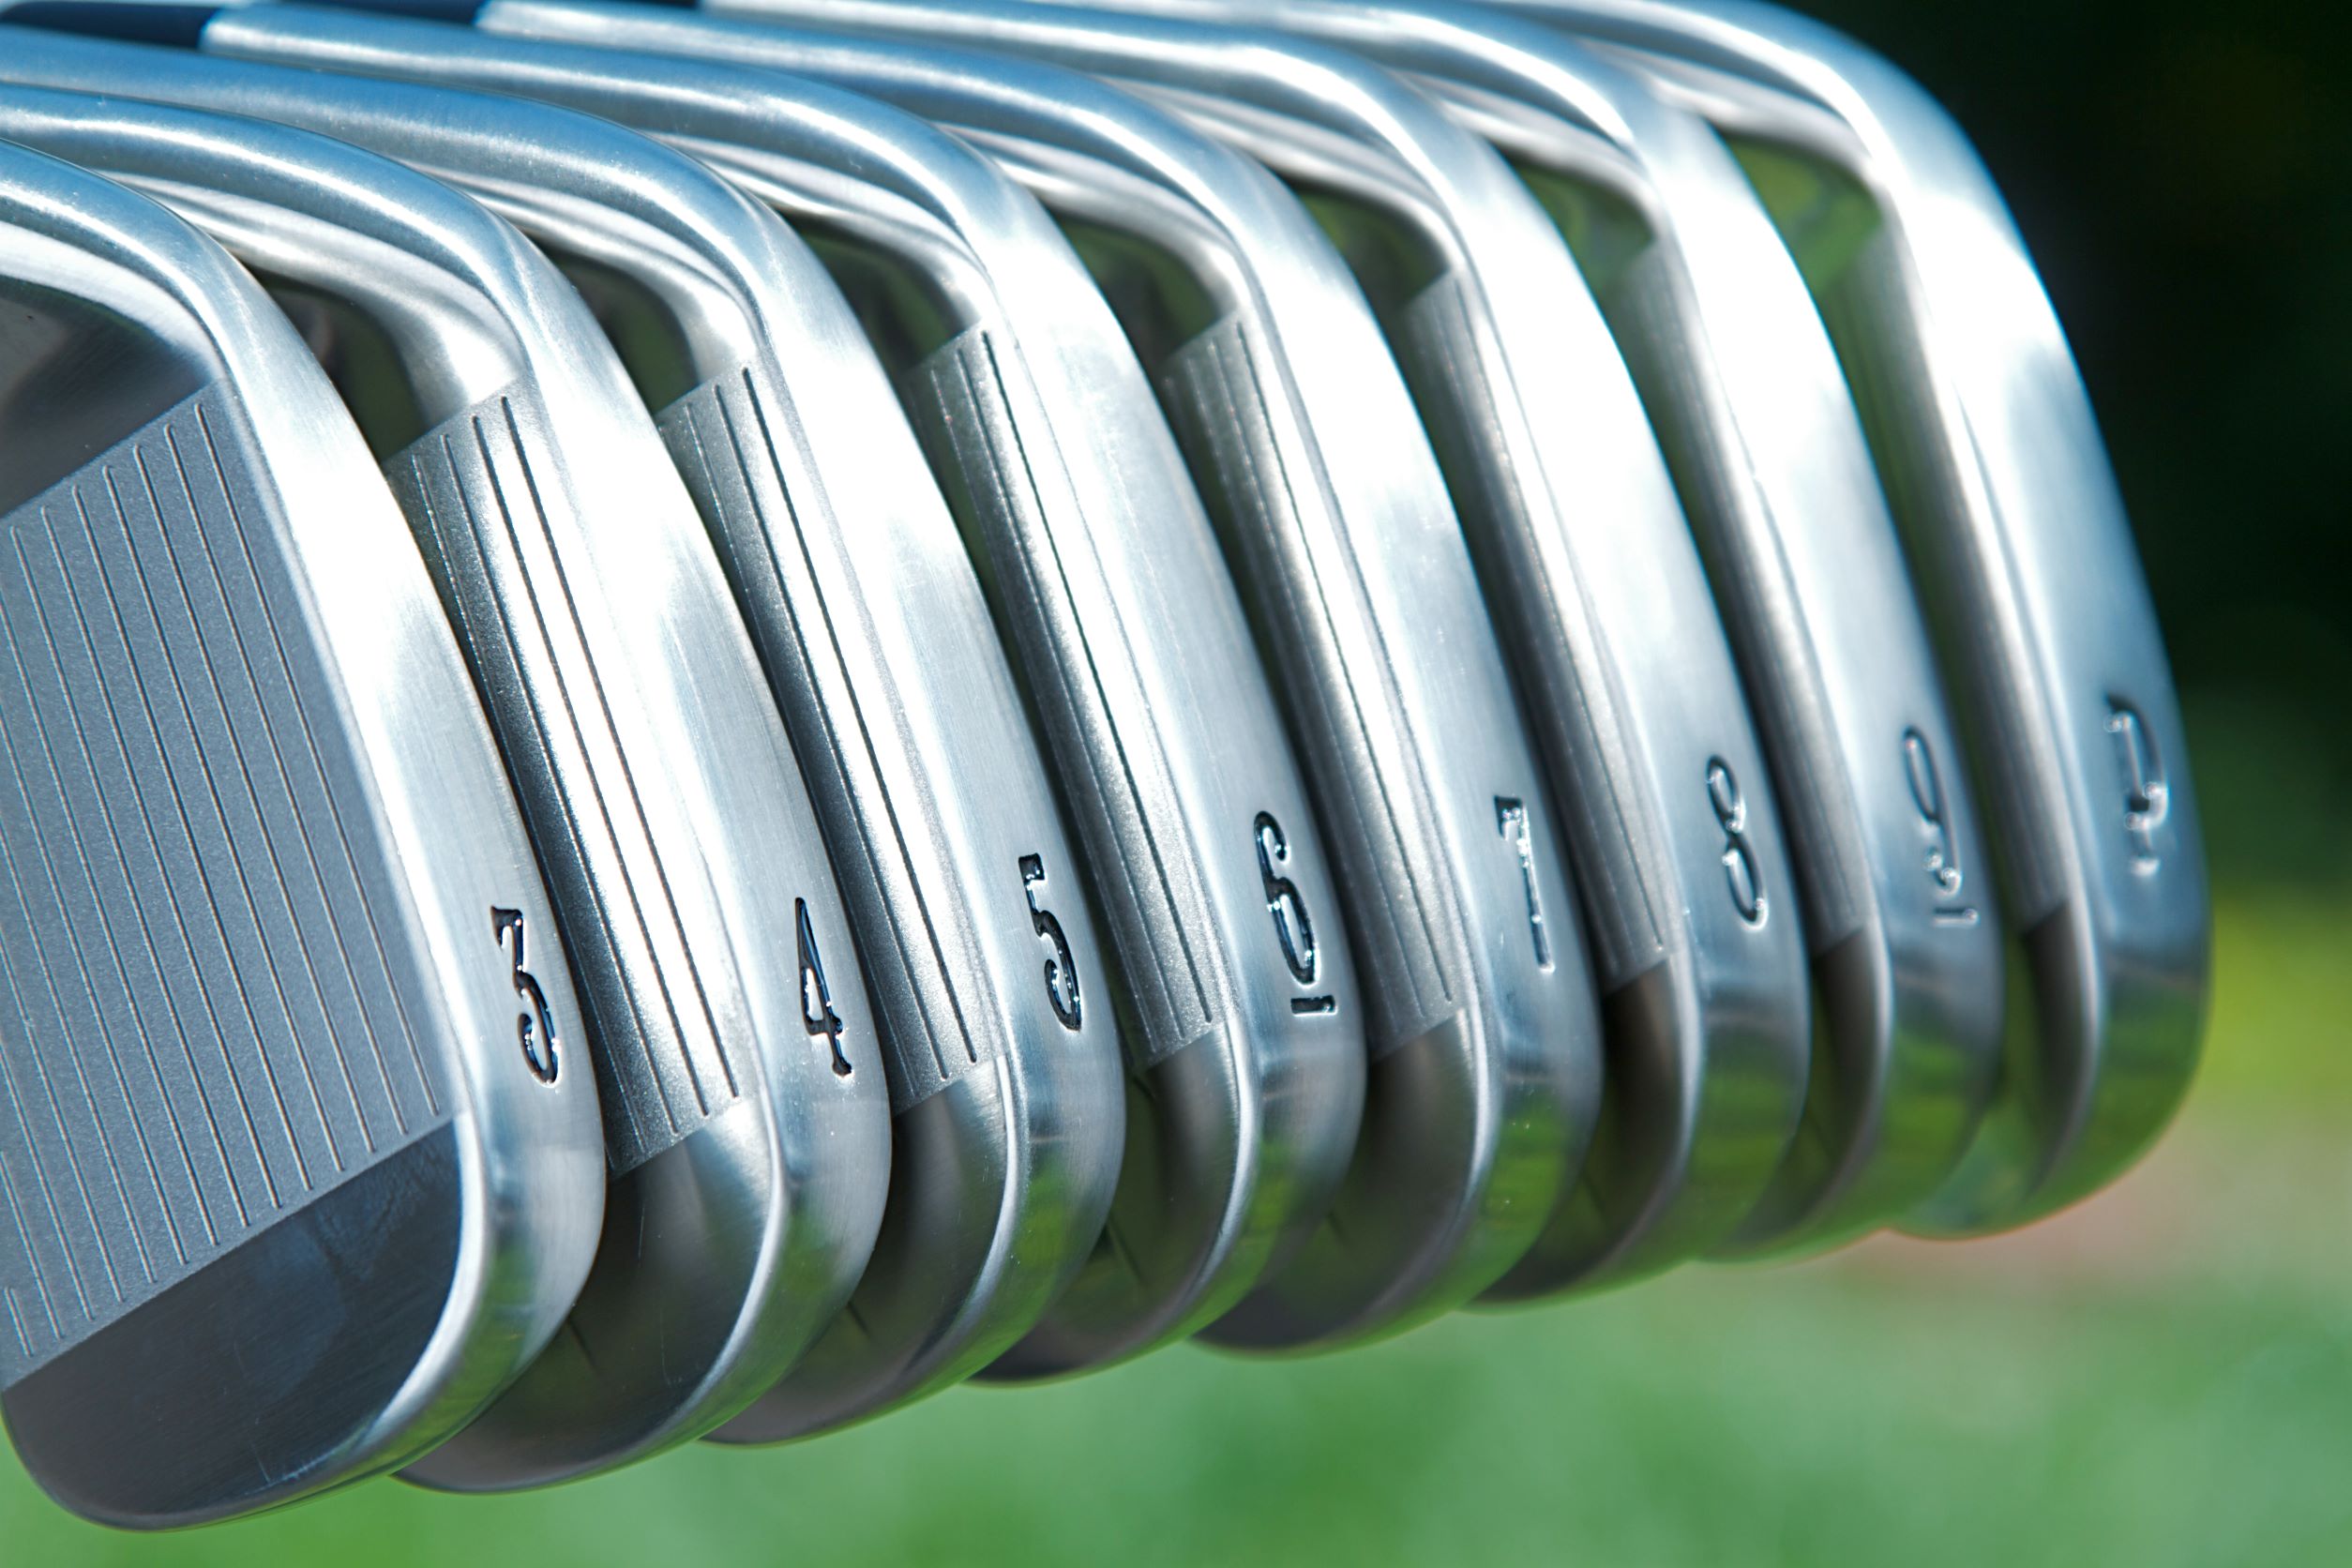 A set of golf irons lined up in a row.